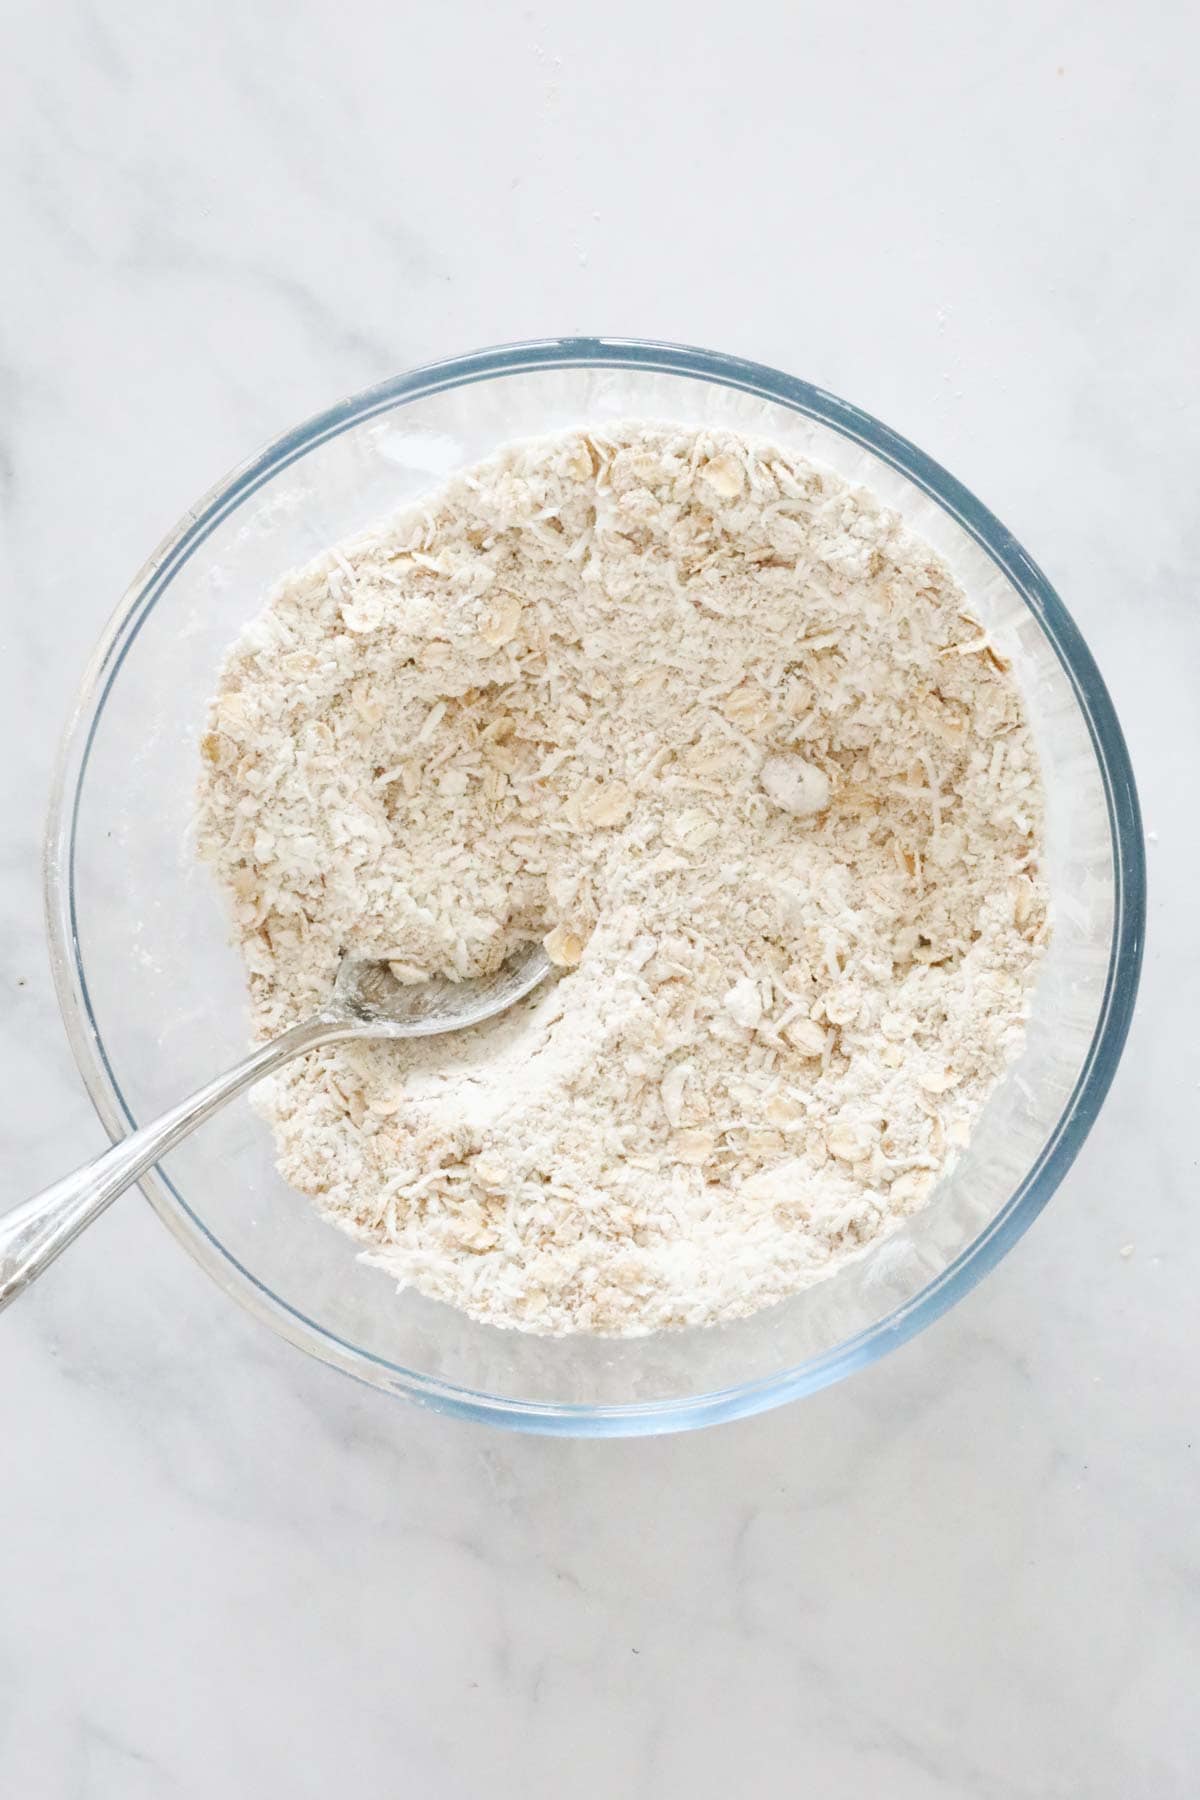 Oats, gluten free flour and coconut mixed in a mixing bowl.